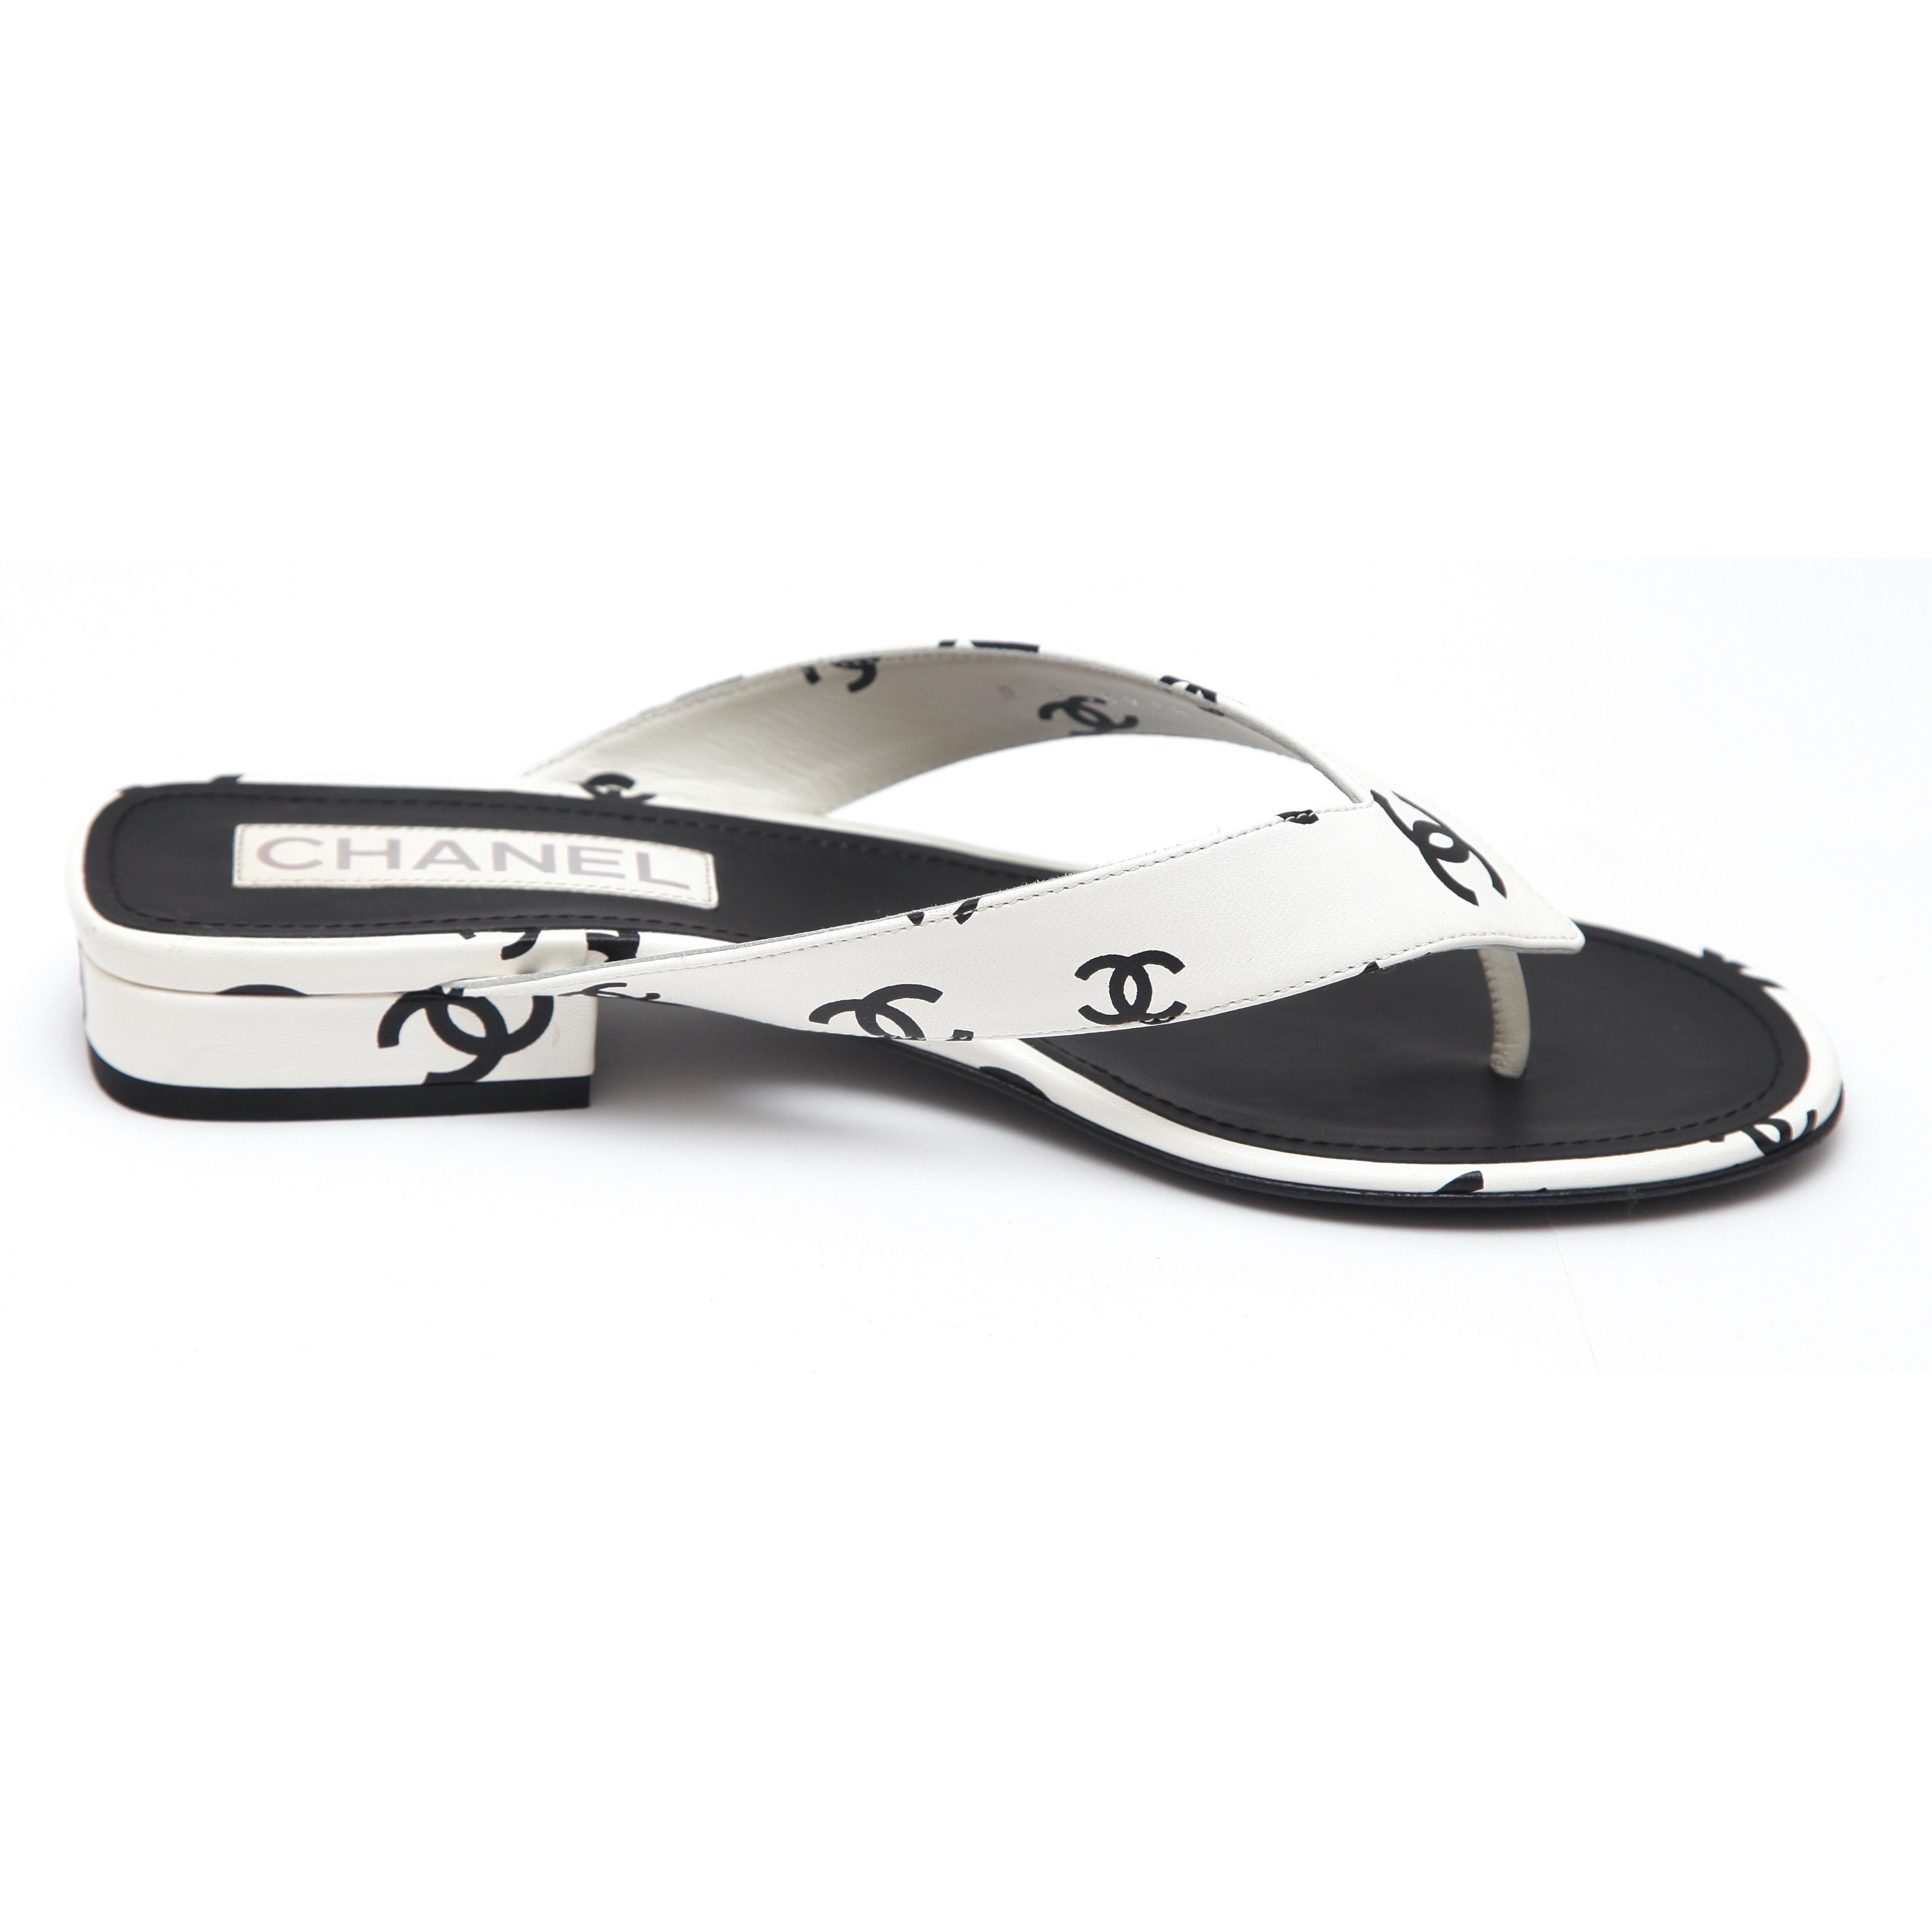 GUARANTEED AUTHENTIC CHANEL 22S LAMBSKIN THONG SANDALS

• Design:
• Runway print black CC logo thong sandals against a white lambskin leather color.
• Slip on.
• Leather lining and sole.
• Comes with dust bags.

Size: 38

Measurements